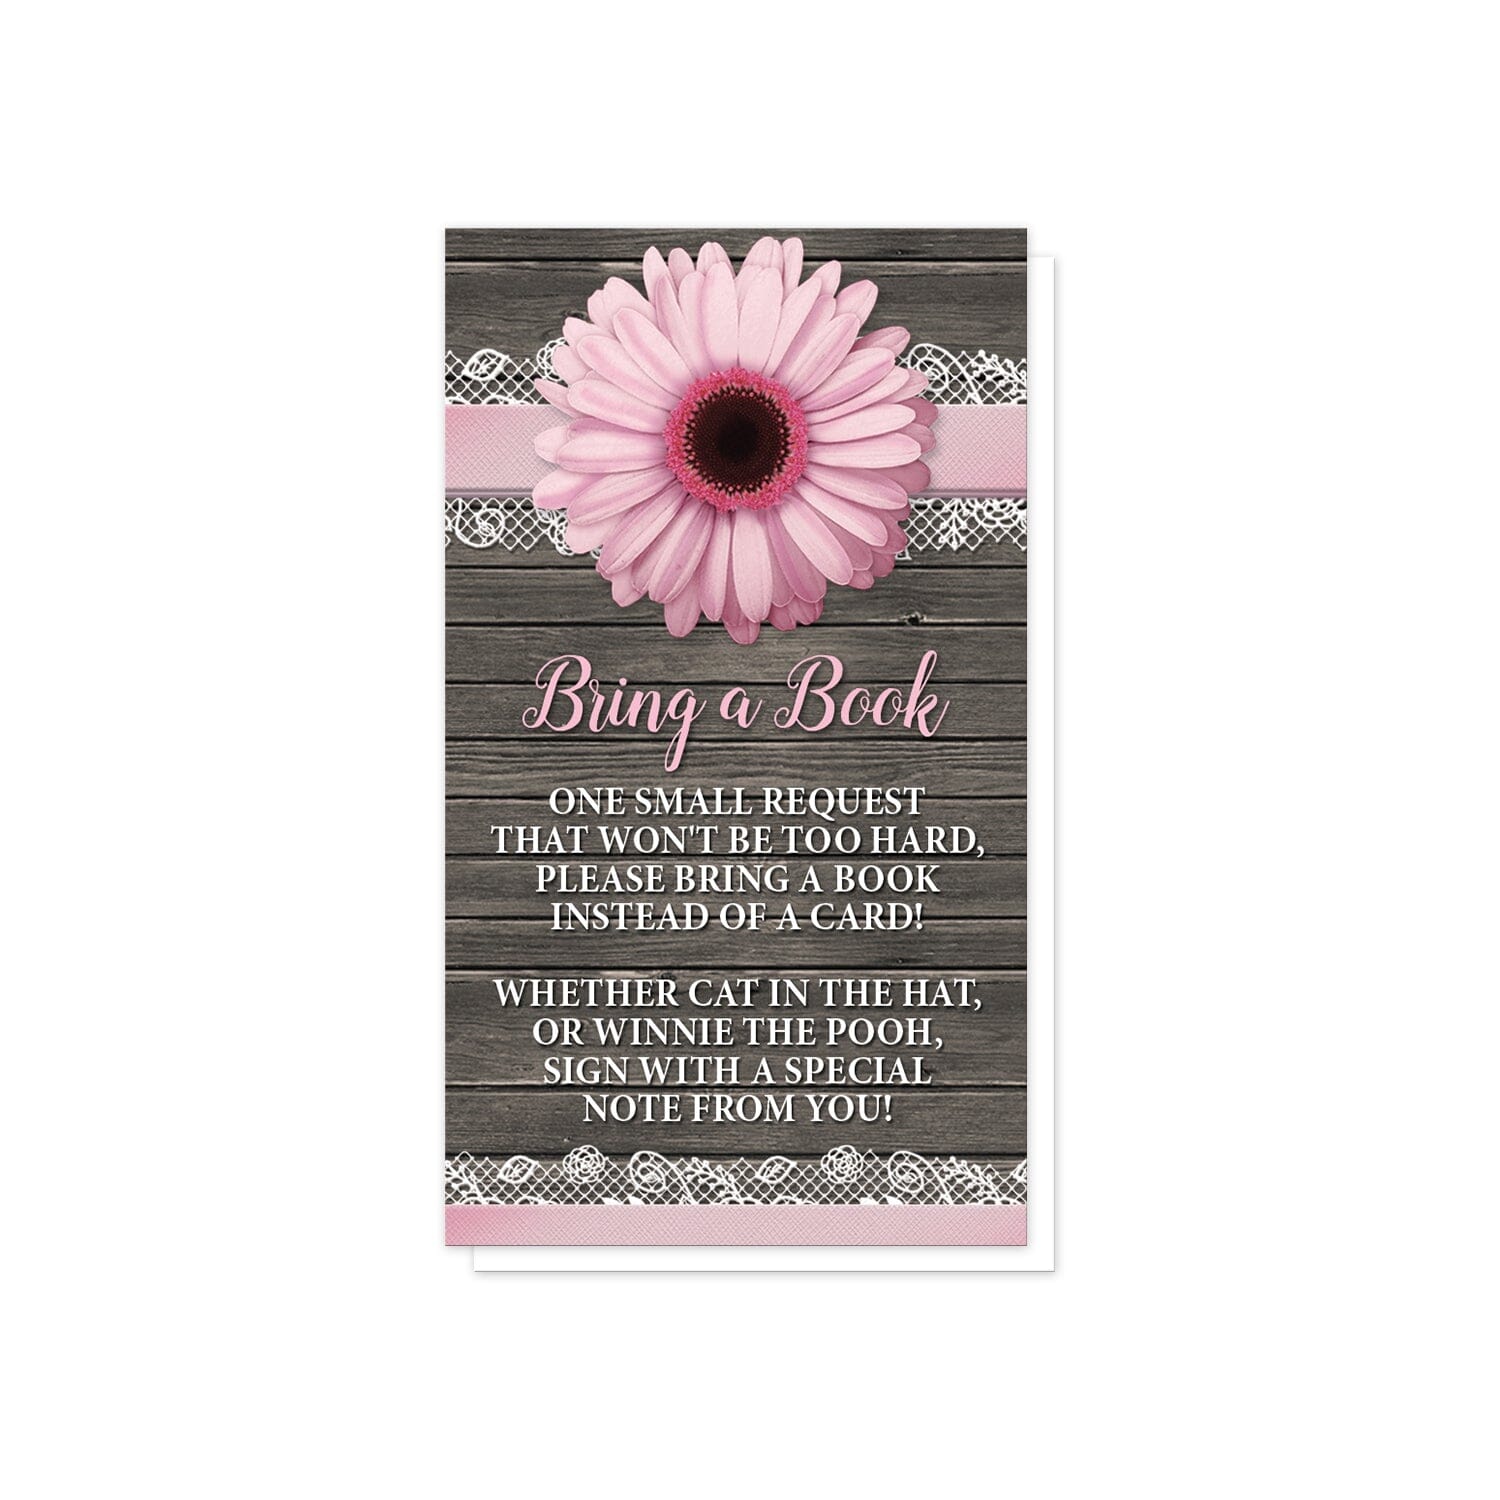 Pink Daisy Lace Rustic Wood Bring a Book Cards at Artistically Invited. Southern-inspired pink daisy lace rustic wood bring a book cards designed with a pink daisy flower centered at the top on a pink and white lace ribbon illustration, over a country brown wood background. Your book request details are printed in pink and white over the wood design below the beautiful pink daisy.